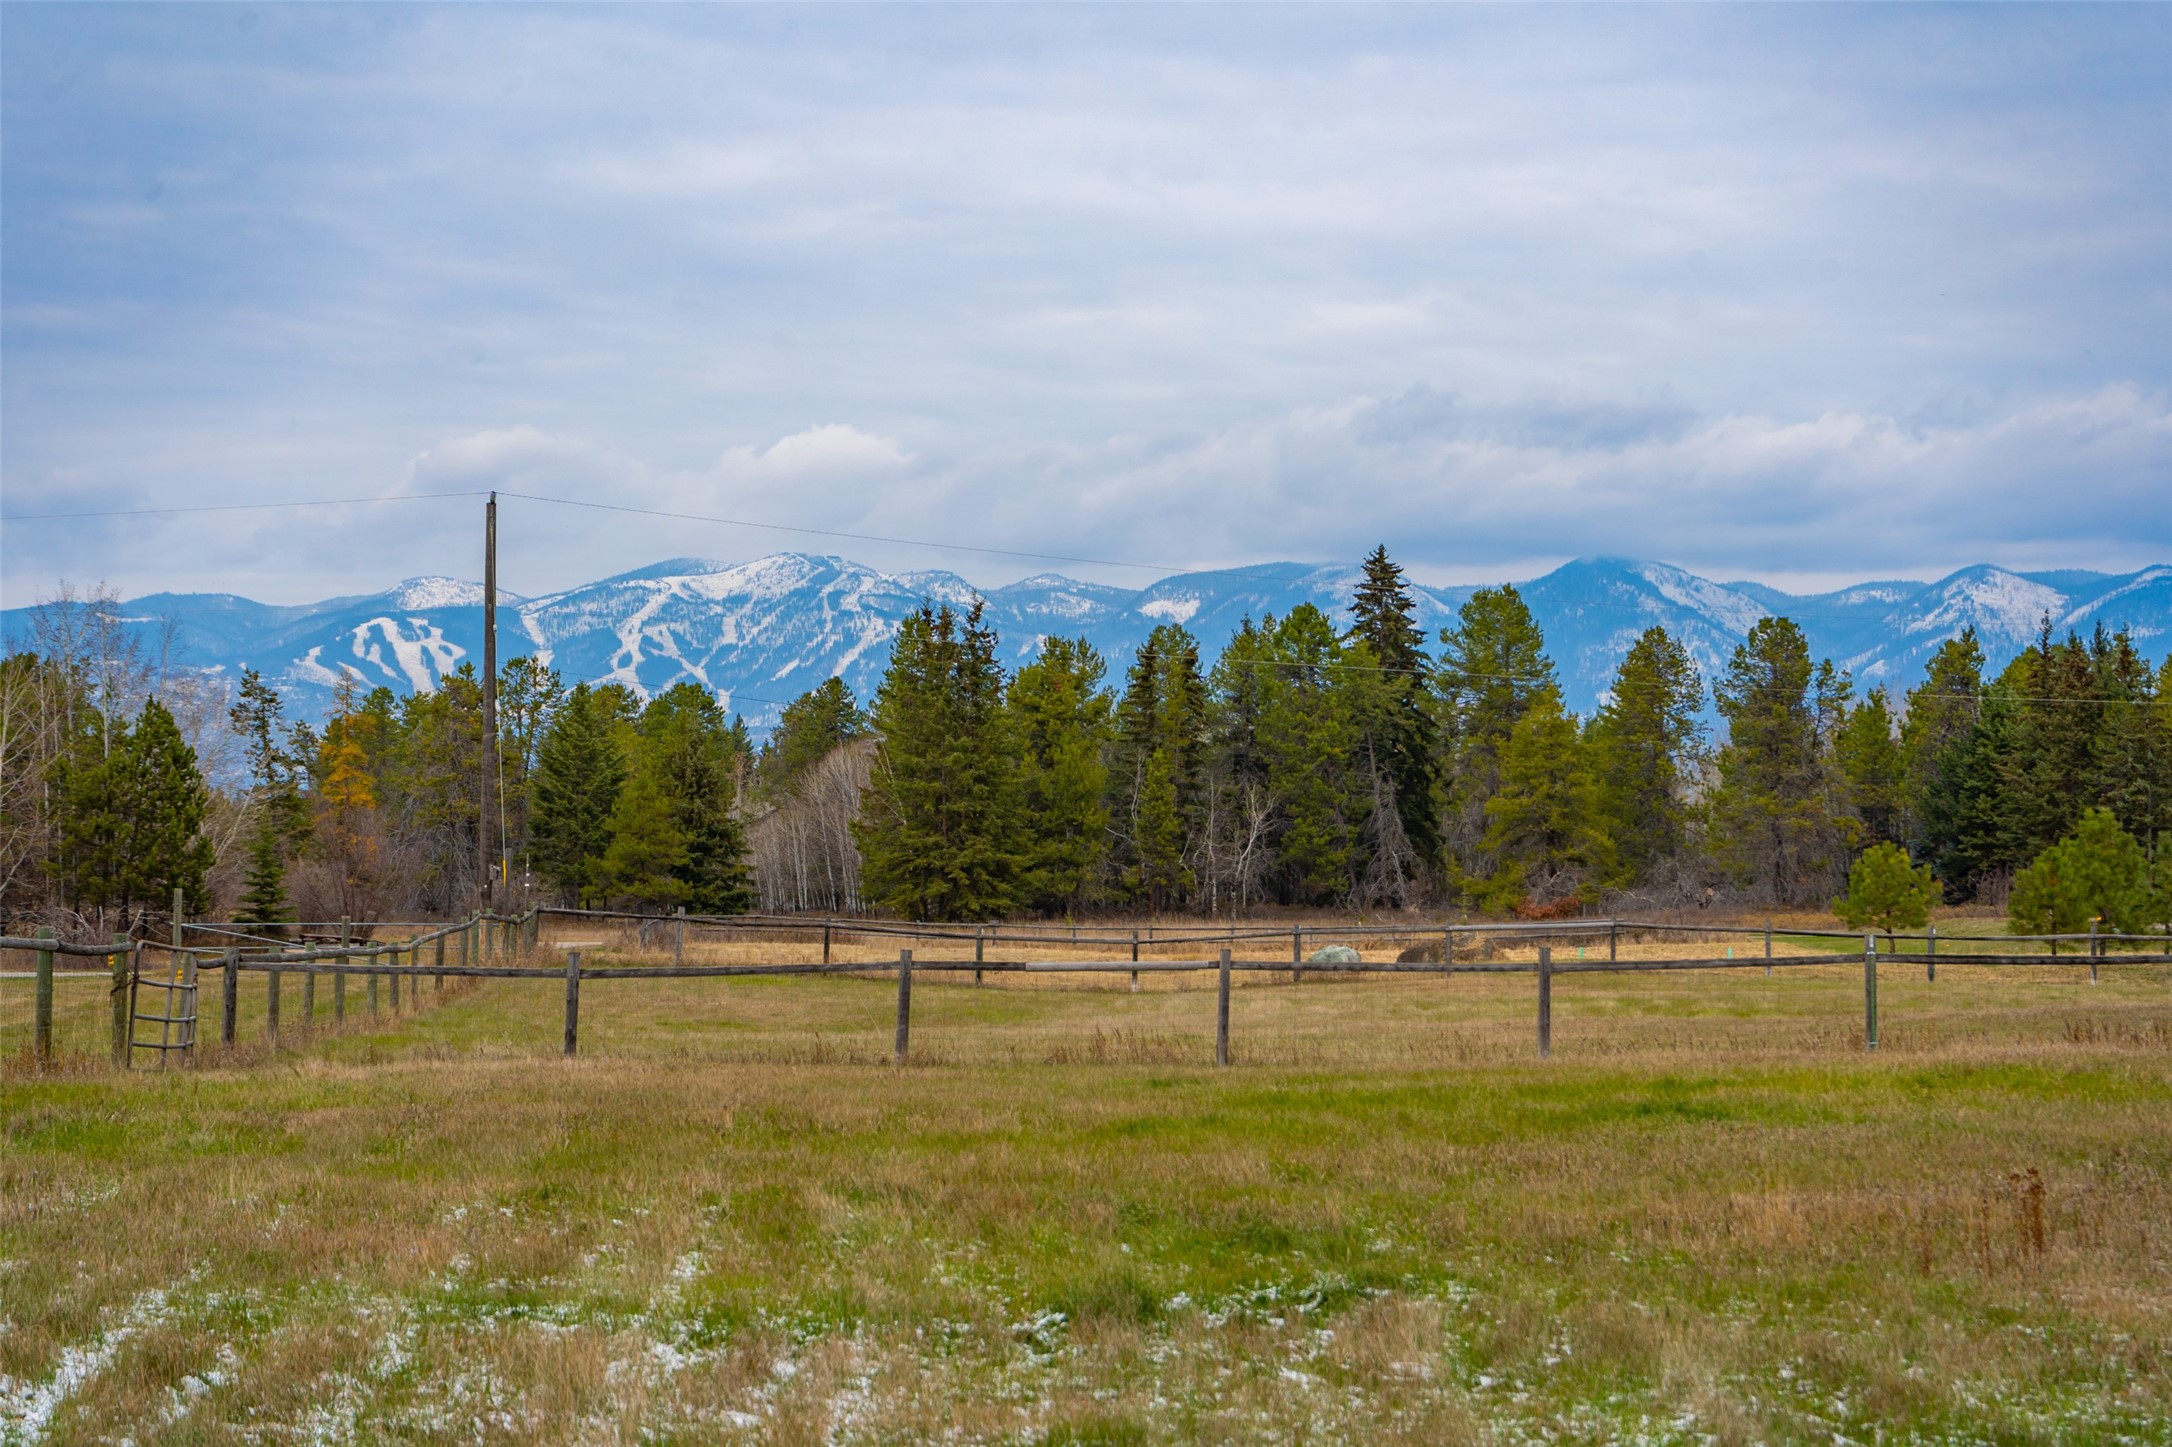 Wide Open Opportunity! This expansive mixed-use property, currently utilized as a residential haven w/ 3 distinct living units, spans 5+ flat & subdividable acres of prime real estate, boasting direct access to Highway US 93 S. Just Minutes from downtown Whitefish, this versatile property offers a wealth of possibilities. BS/HO zoning offers an array of potential uses, making it an ideal investment. Professional offices or creative workspaces, showrooms, farm/equipment sales, light assembly & manufacturing/fabrication to name a few. Additionally, the property offers various conditional uses, including a brewery/distillery, storage facilities, short-term rentals, & even multifamily dwellings. Main house: 2bed/1bath, Guest: 3/1, Apt: 1/1. 2 on-site septic systems to serve a total of 8 bedrooms. Don't miss out on the chance to own a piece of Whitefish offering such diverse potential. Please contact Aaron Noel/Brody Broker Team @ 406-407-4857 or your real estate professional.